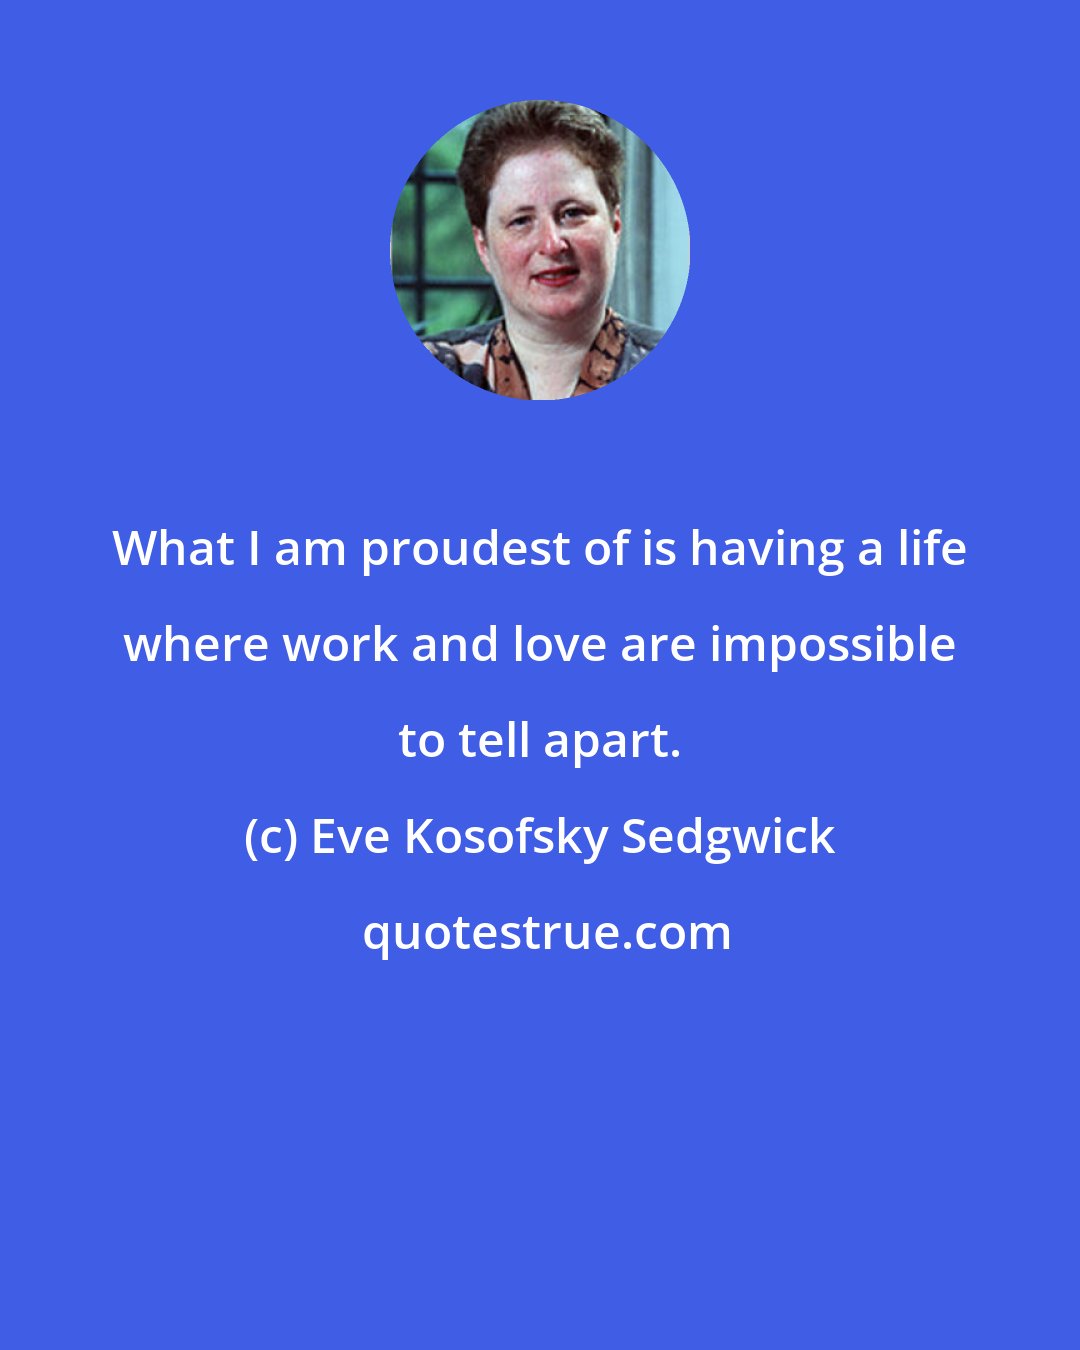 Eve Kosofsky Sedgwick: What I am proudest of is having a life where work and love are impossible to tell apart.